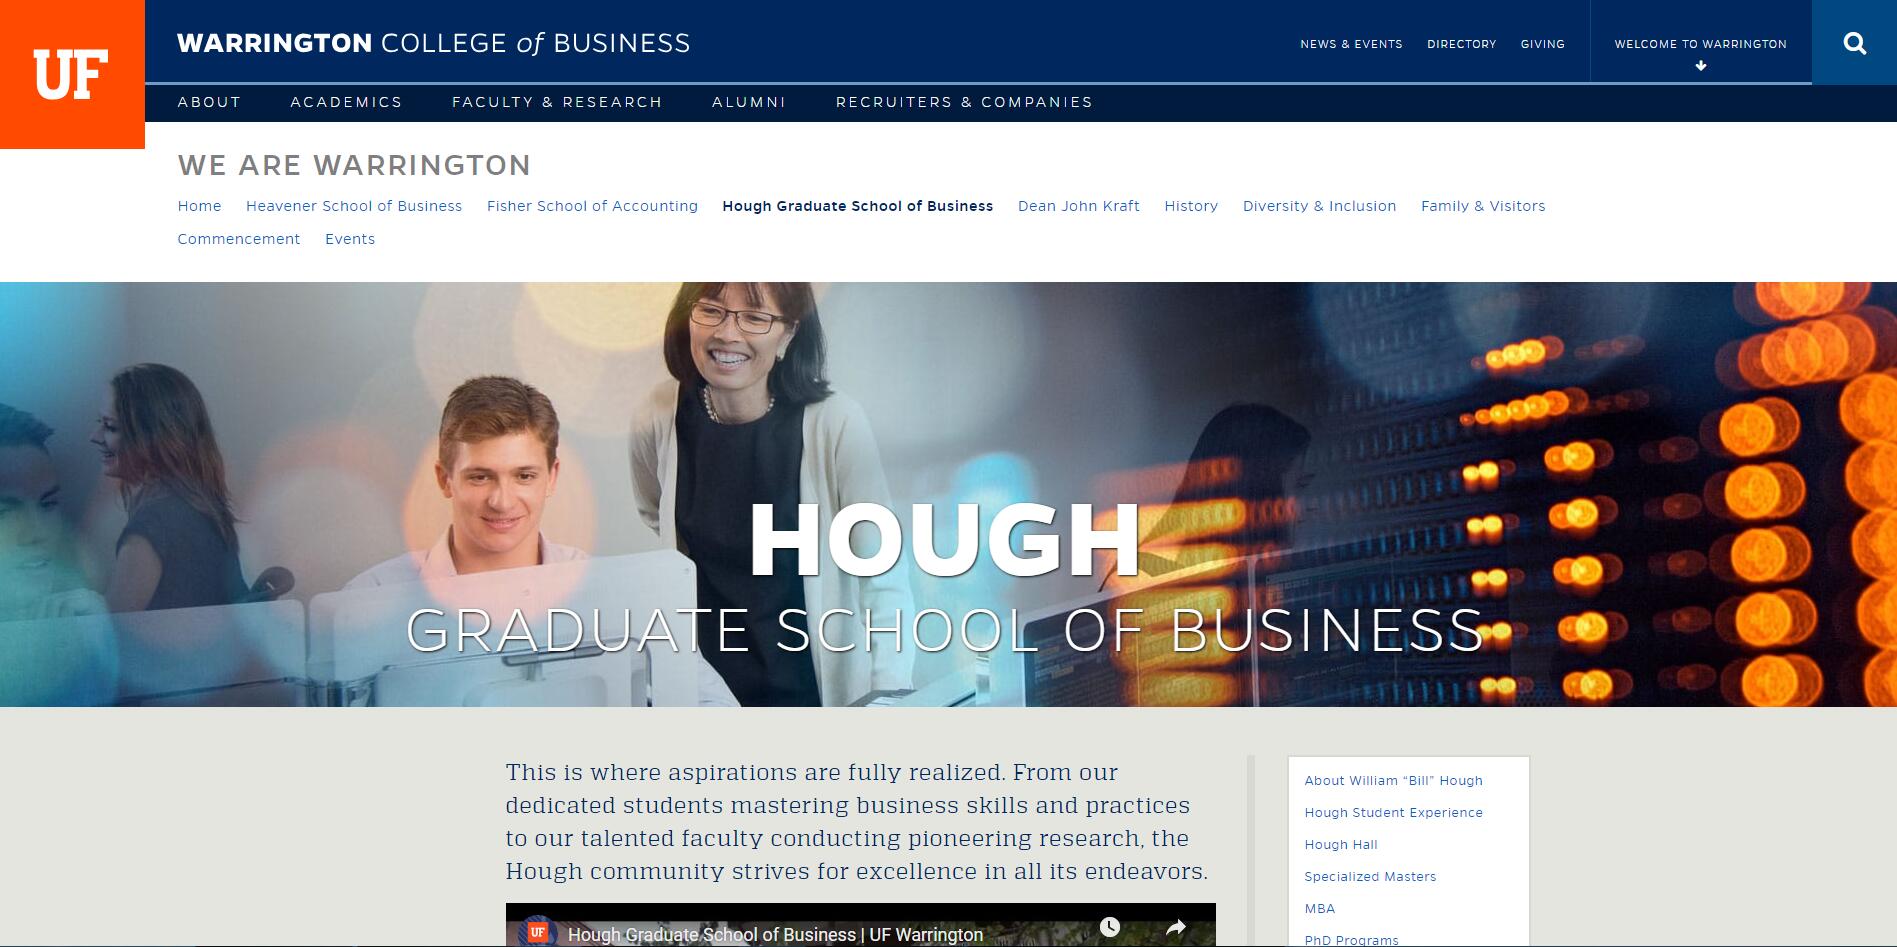 The Hough Graduate School of Business at University of Florida